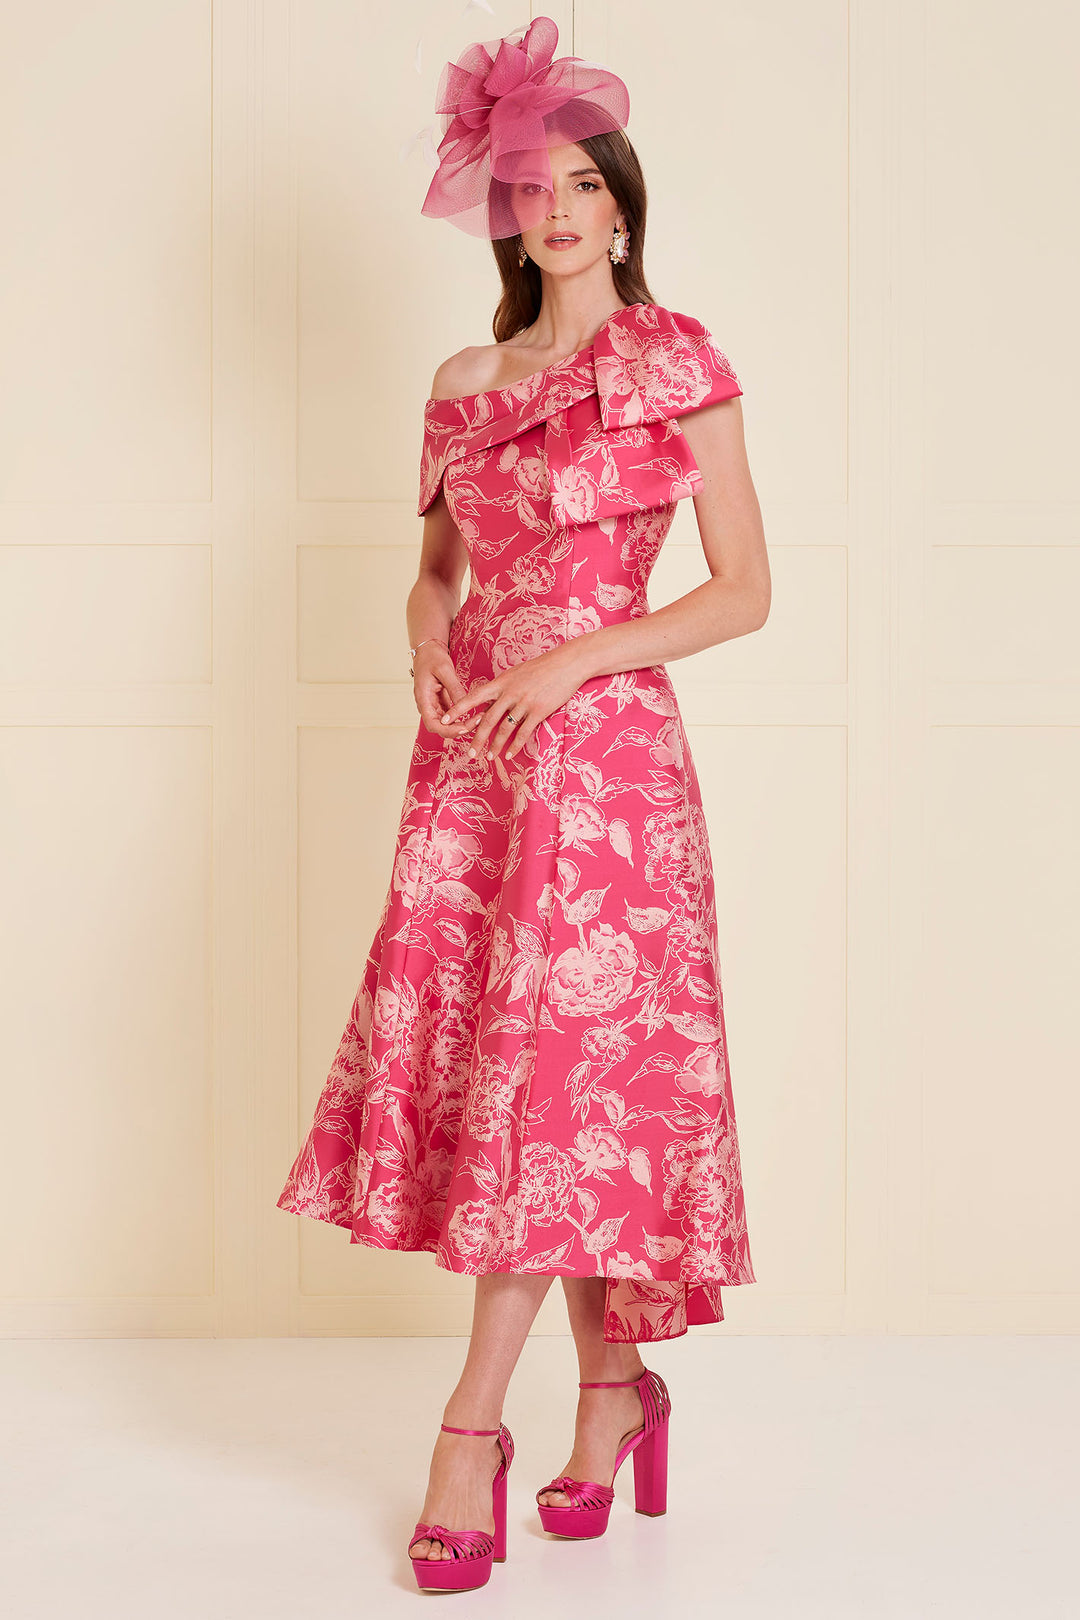 John Charles 29142 Fit and Flare Jacquard Dress with Bow Detail in Flamingo Pink - Rouge Boutique Inverness